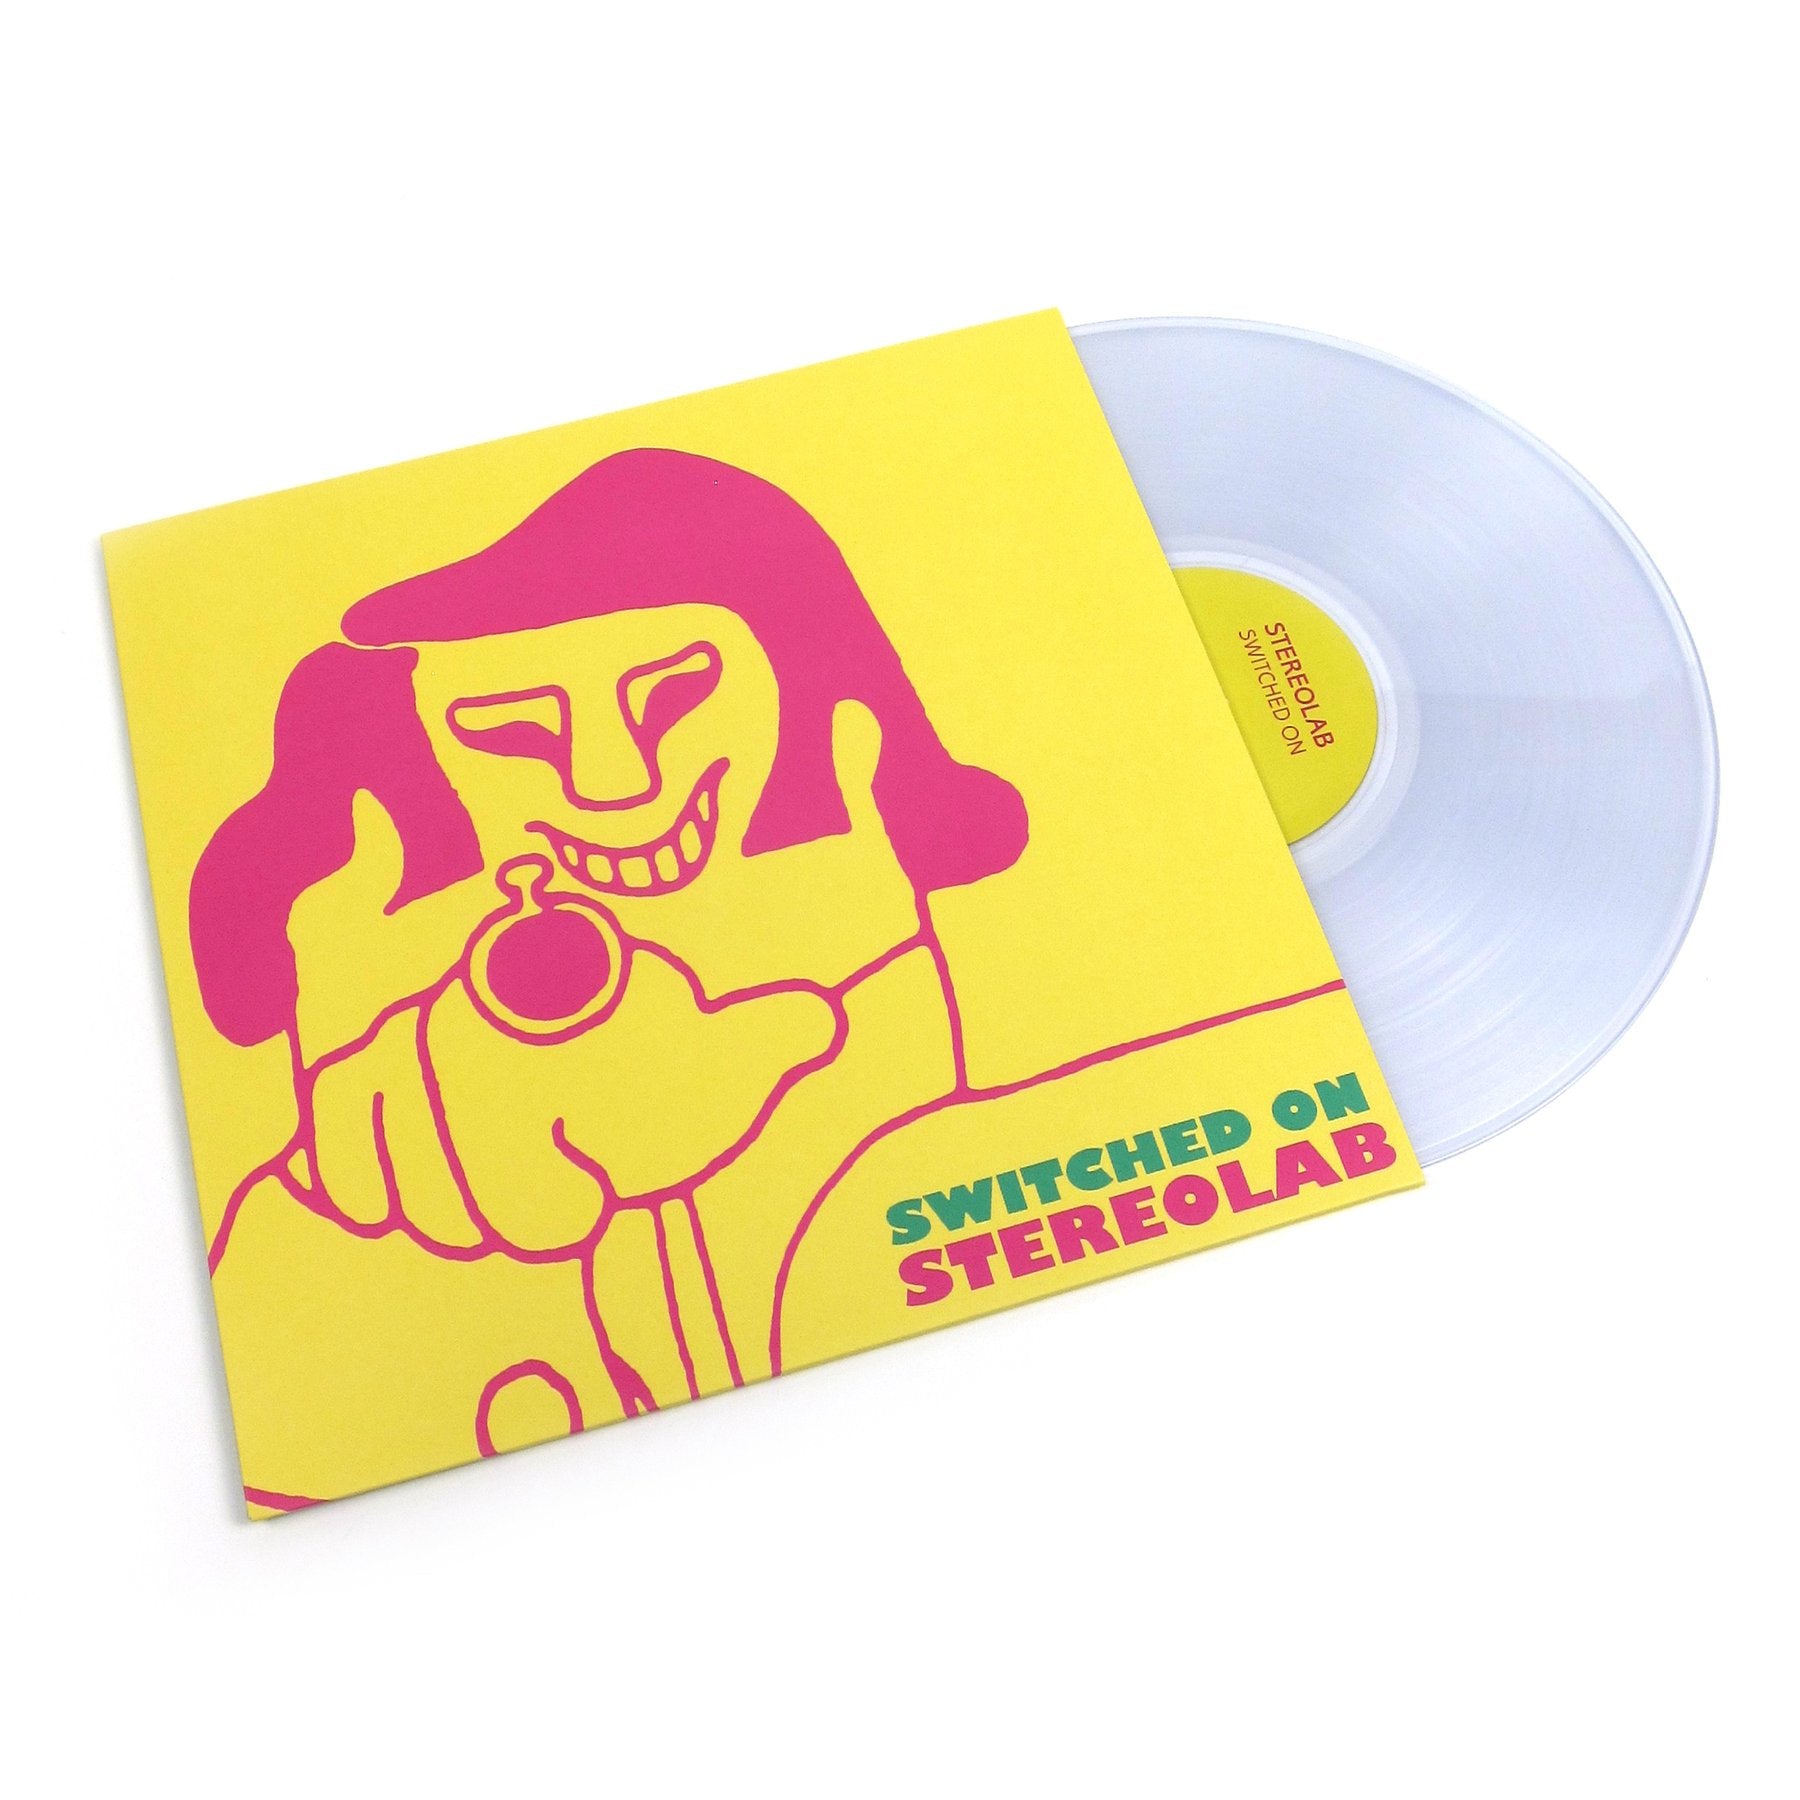 Stereolab ‎– Peng! (1992) - New Vinyl Lp 2018 Too Pure Limited Edition Reissue on Clear Vinyl - Electronic / Kraut / Space Rock